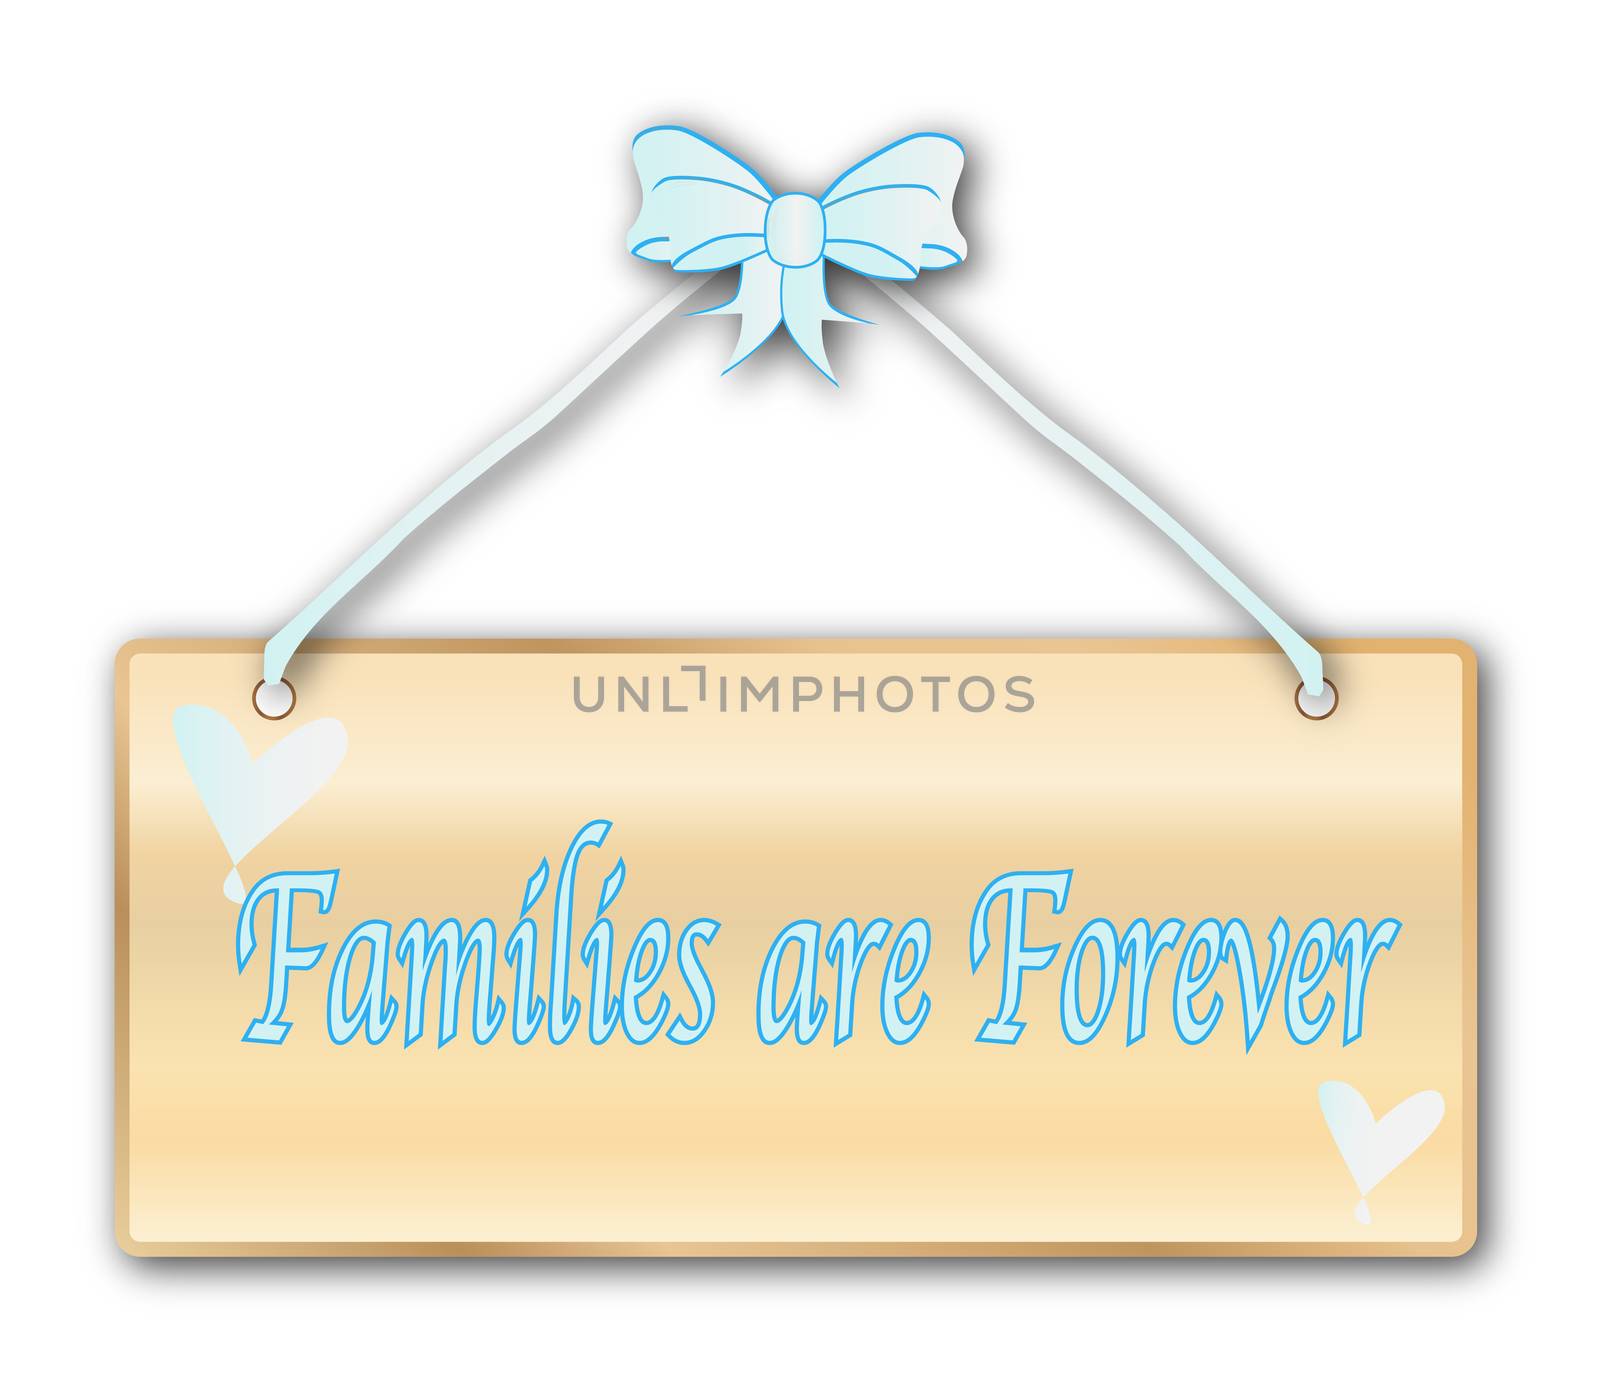 Families Are Forever plaque in woodgrain with light blue ribbon and bow over a white background with love cartoon hearts